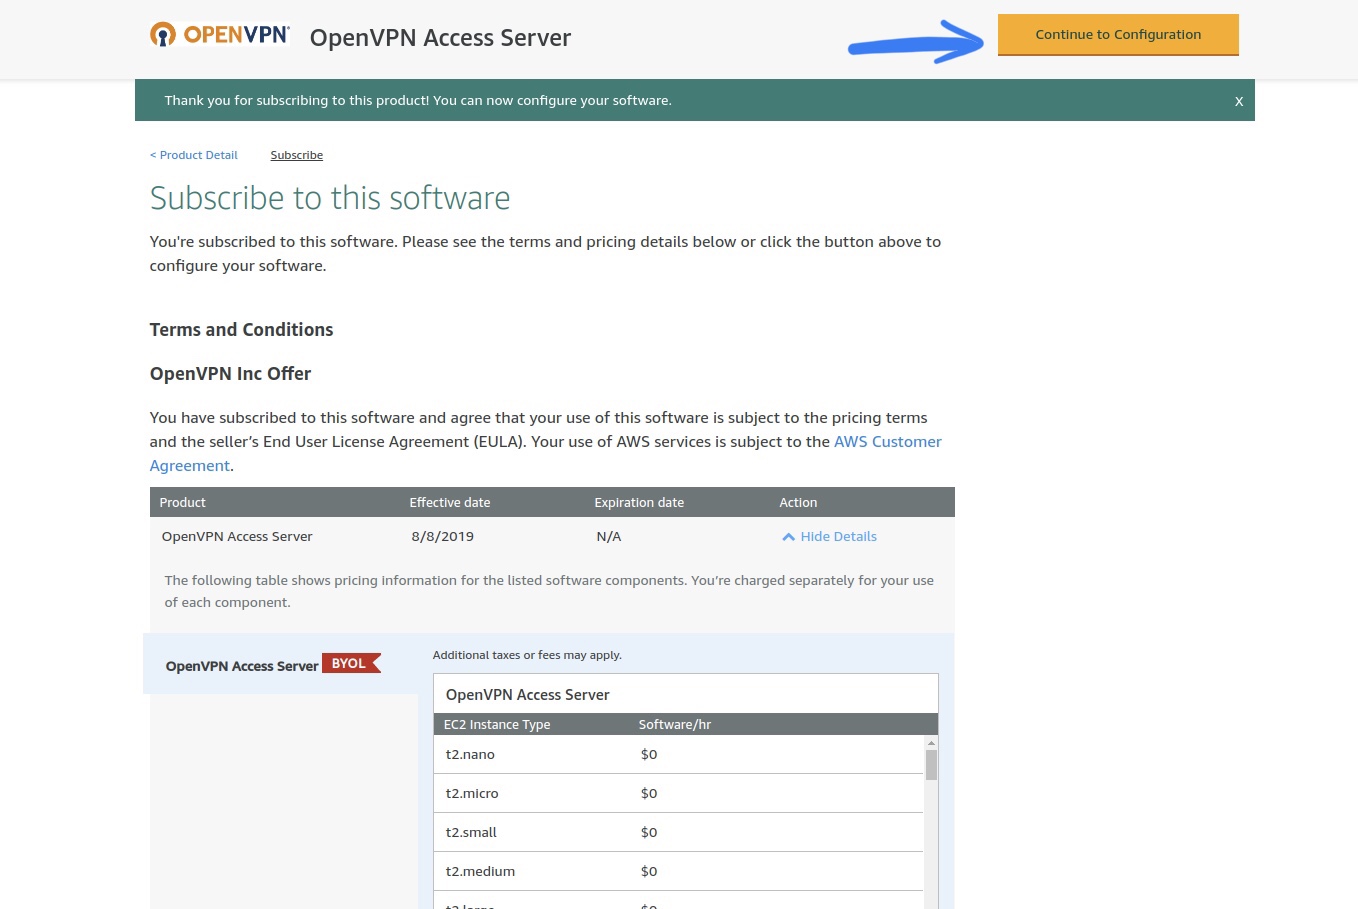 Subscription details page for OpenVPN Access Server